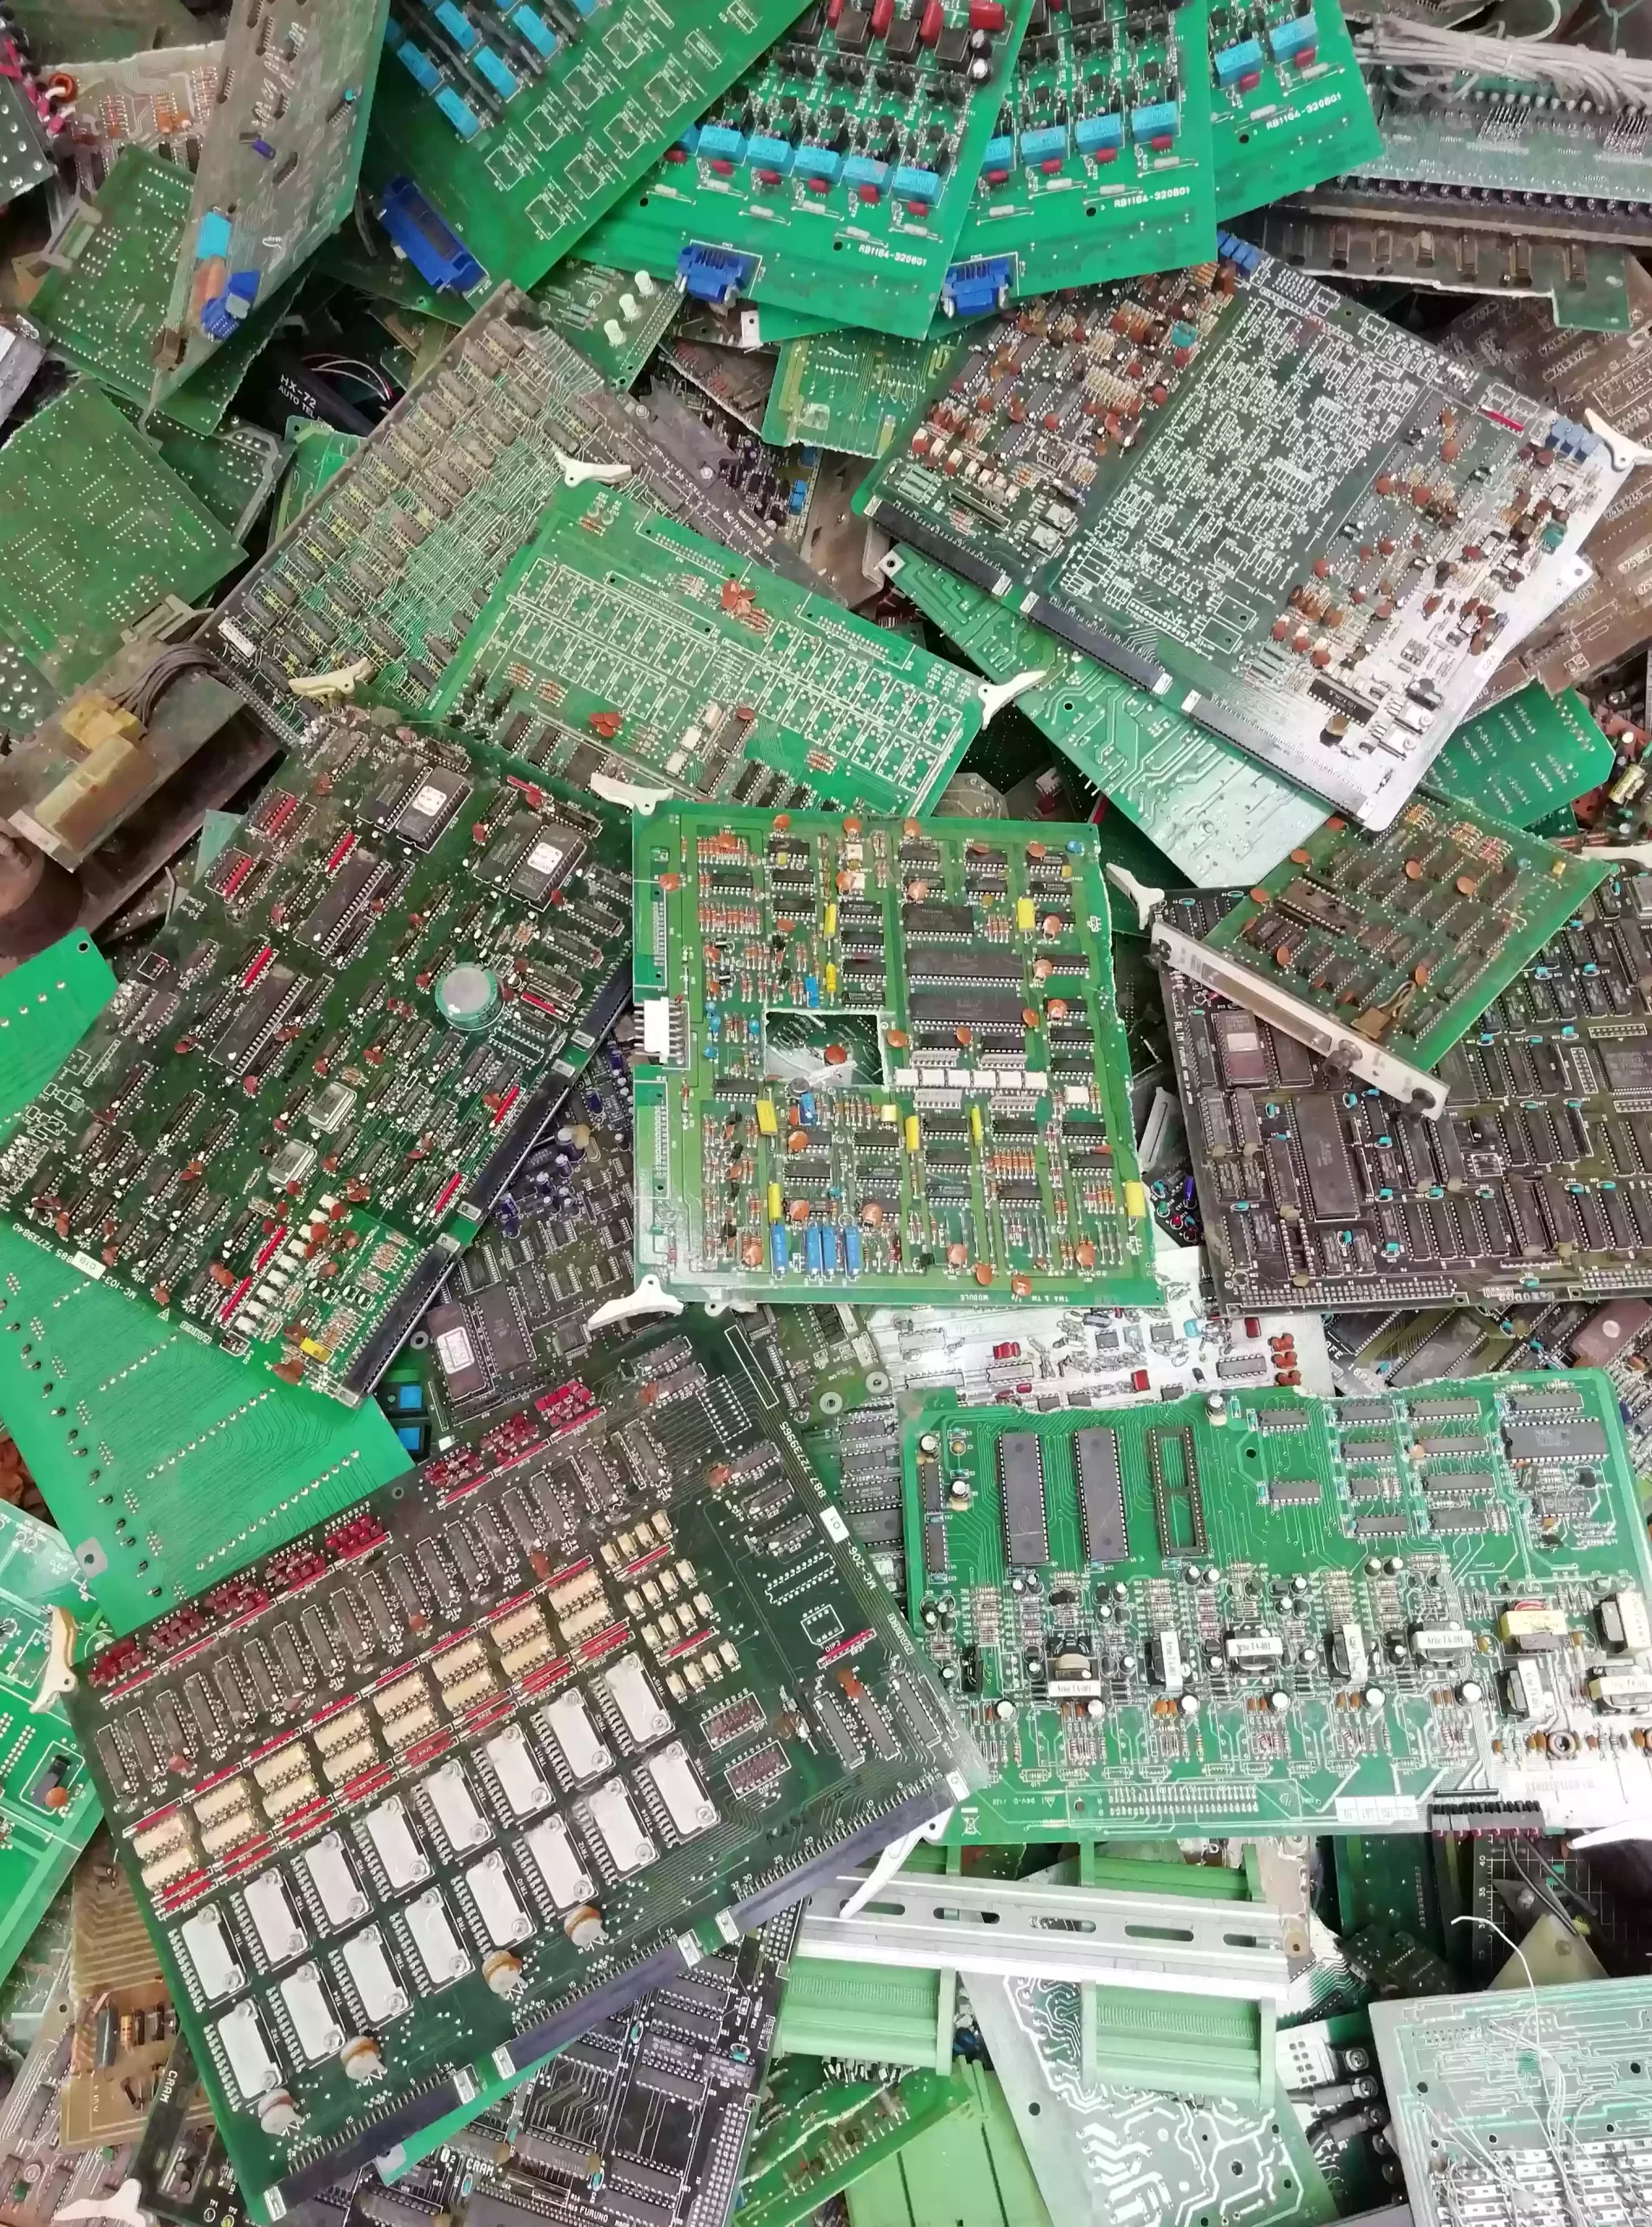 PCB Printed Circuit Boards for recycling scrap for sell and export